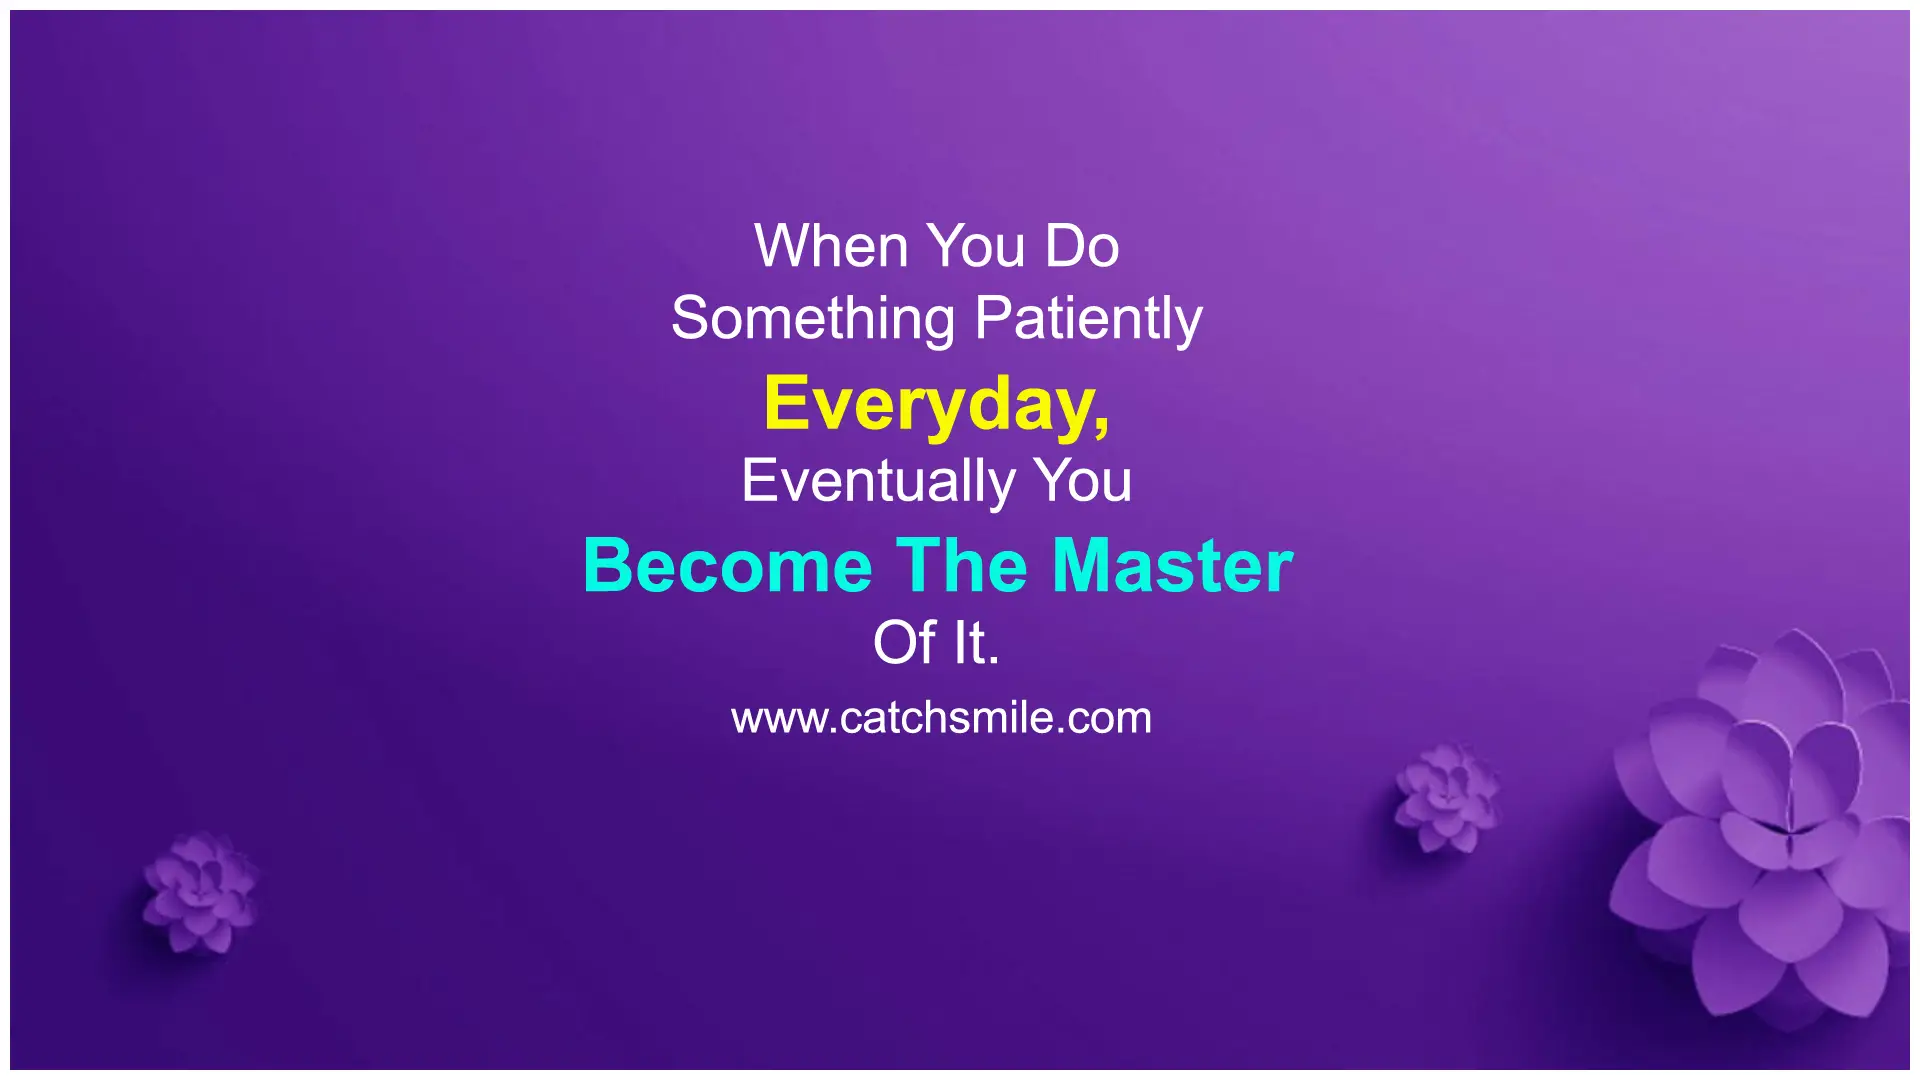 When you do something patiently everyday eventually you become the master of it. Catch Smile